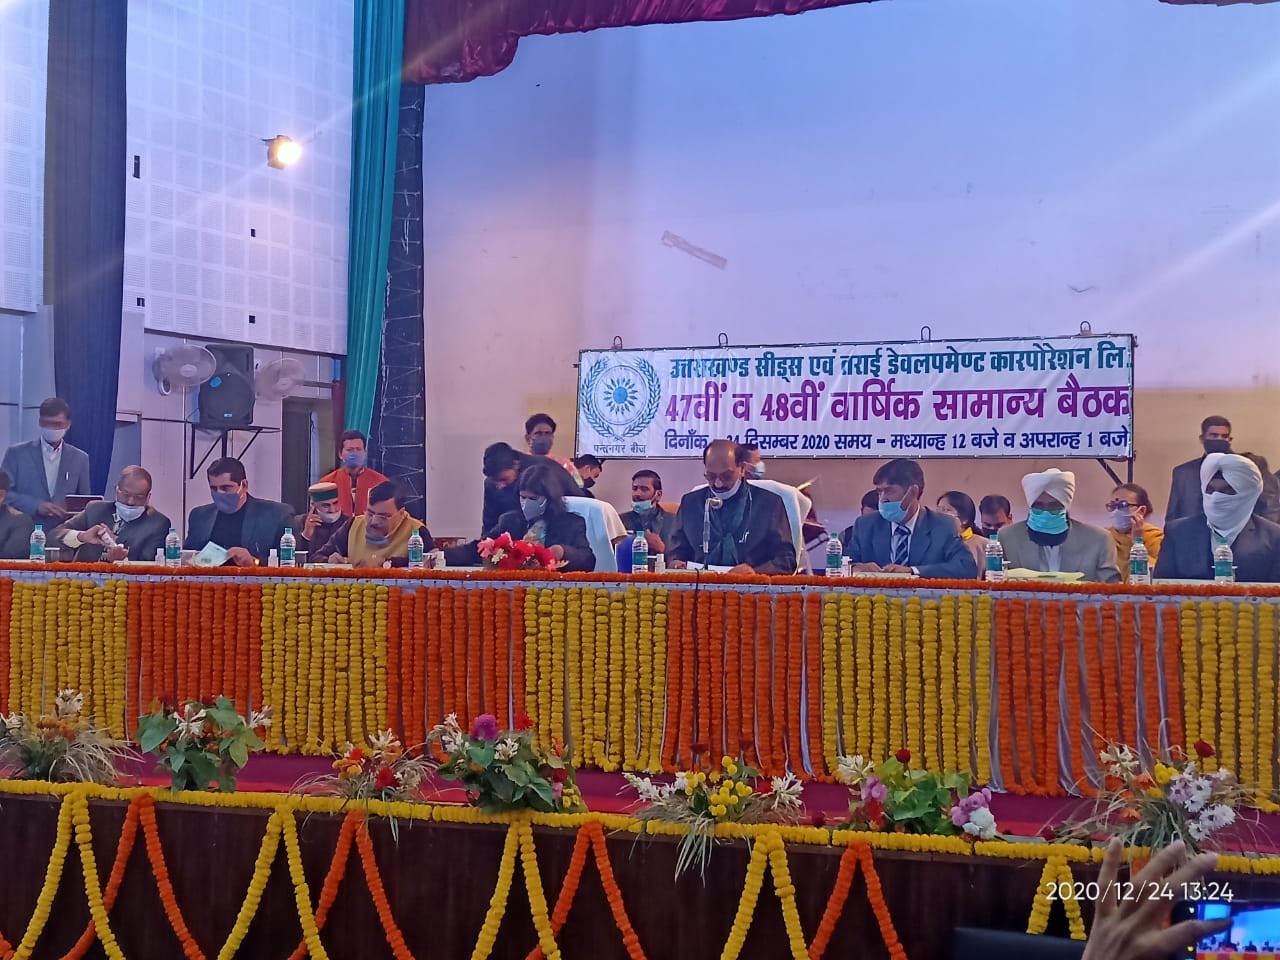 47th and 48th Annual General Meeting National Seeds Corporation Limited